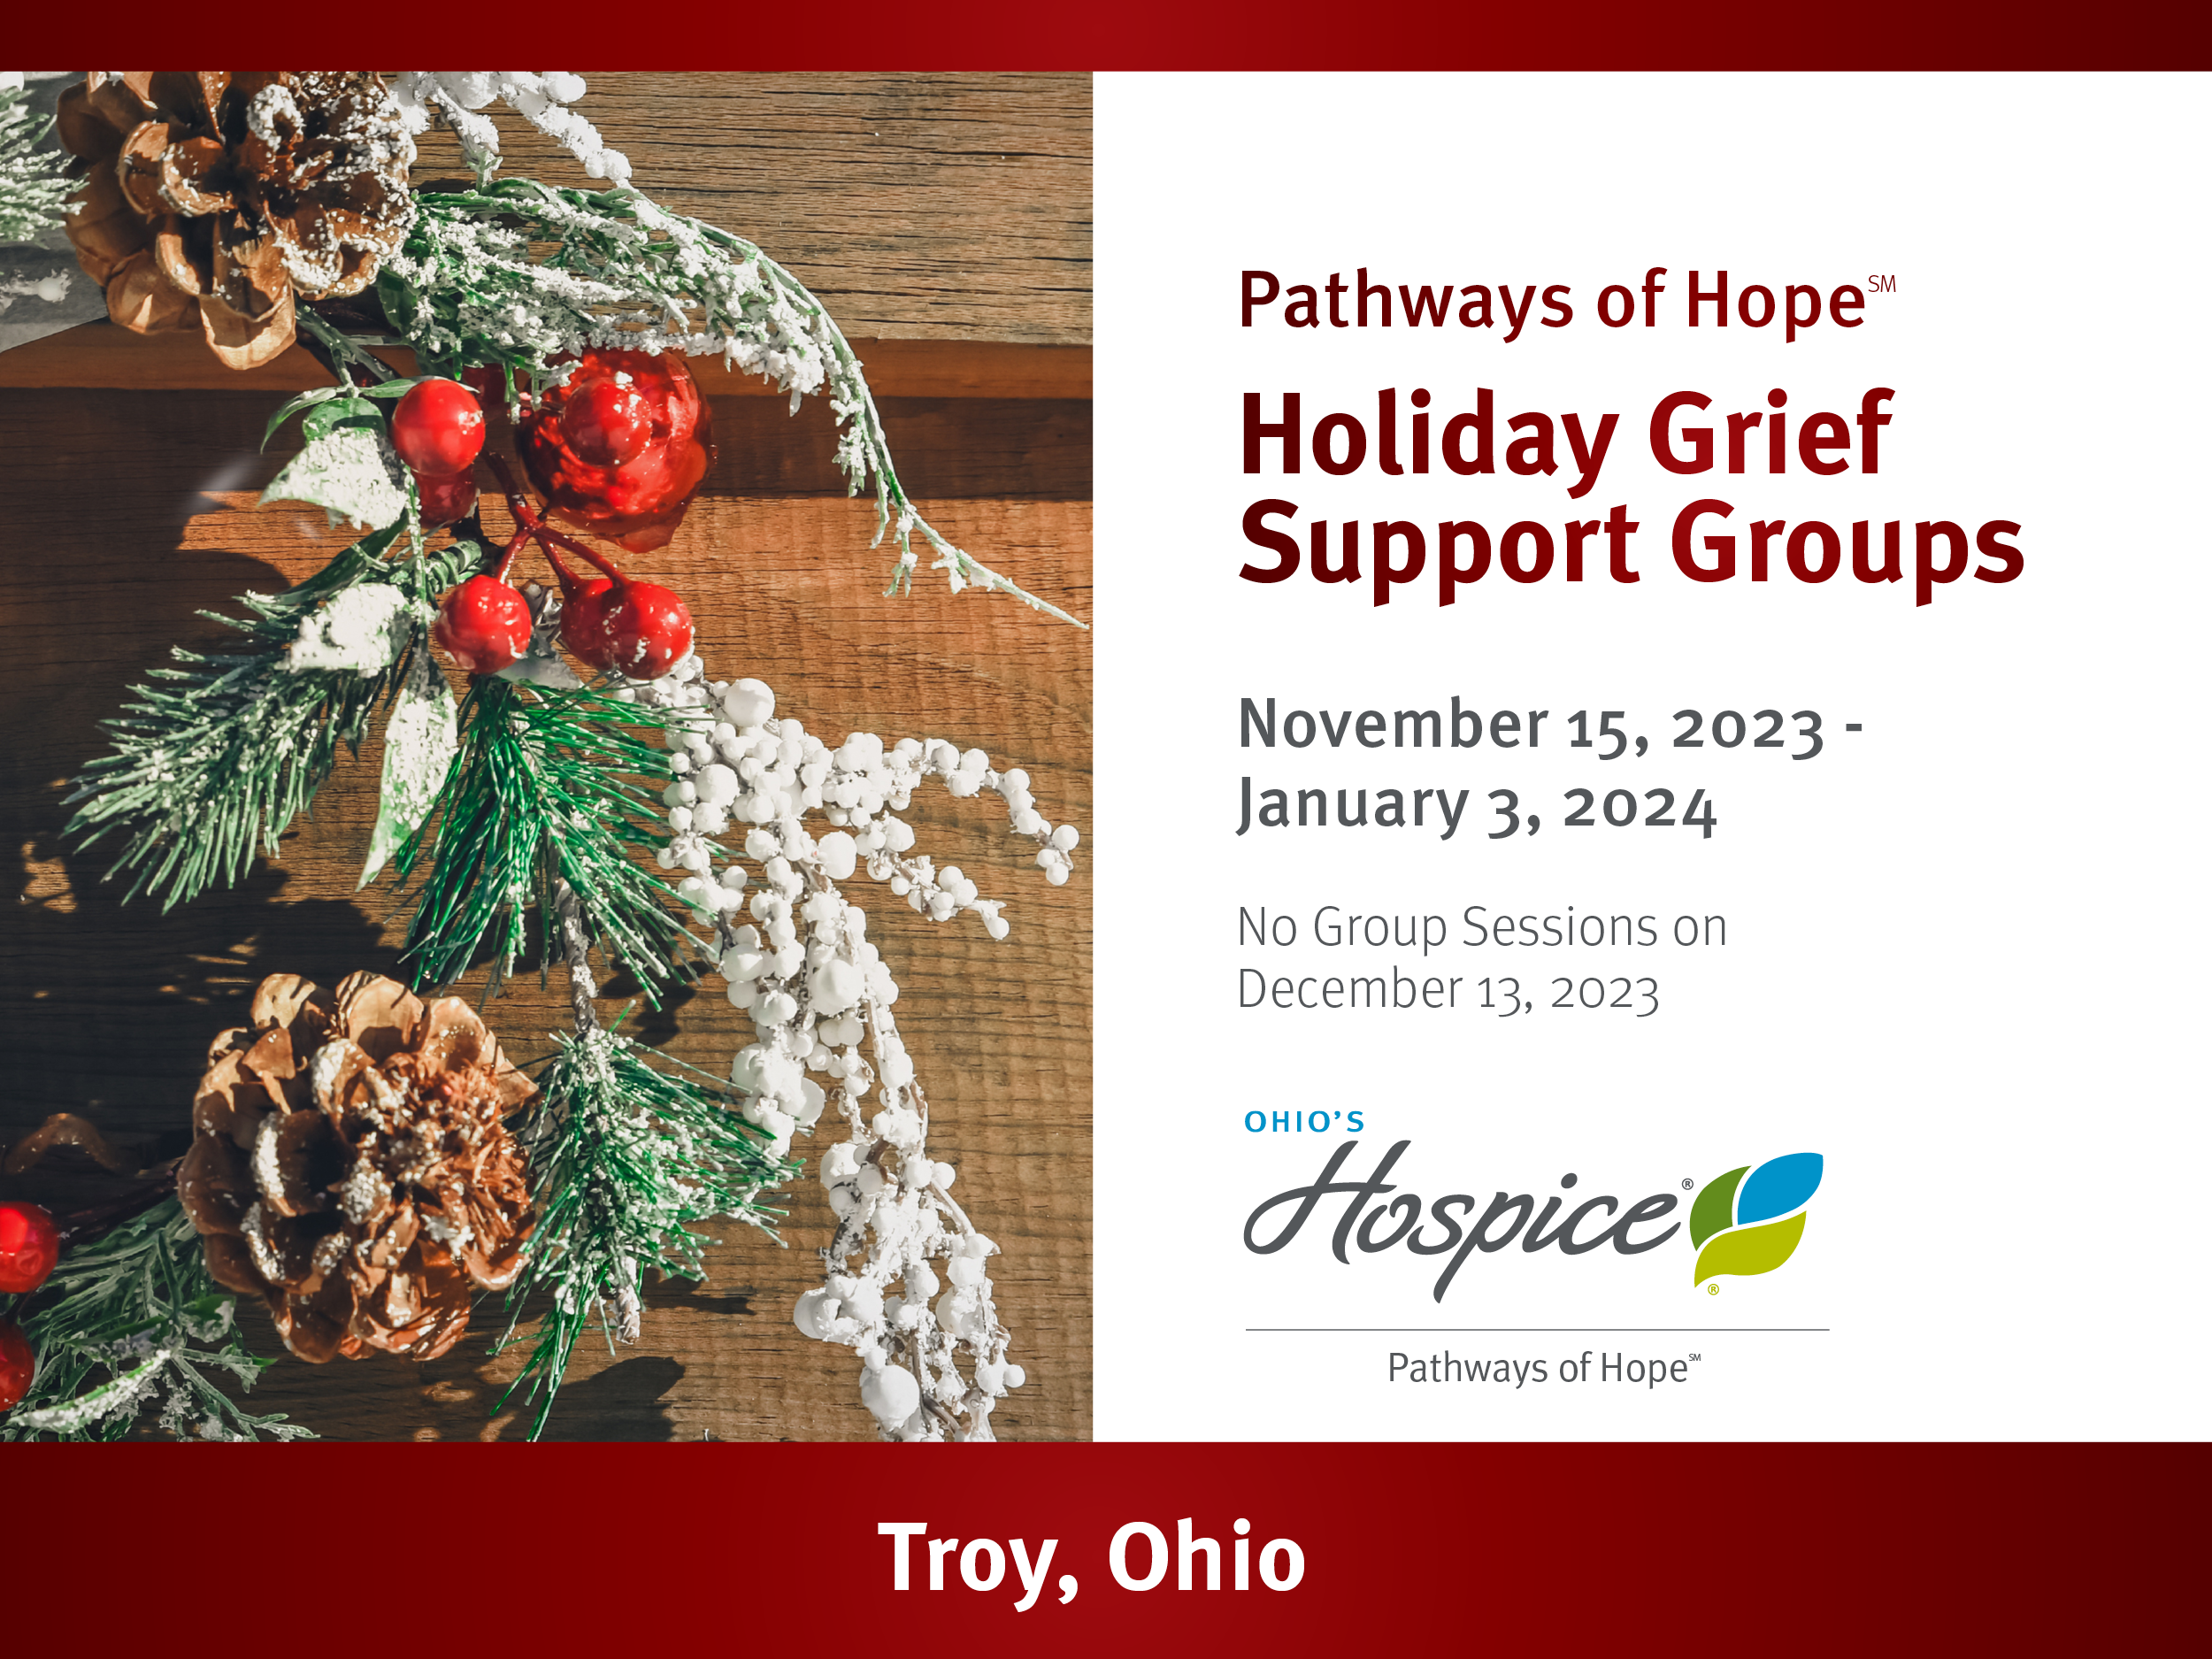 Pathways of Hope Holiday Grief Support Groups. Ohio's Hospice